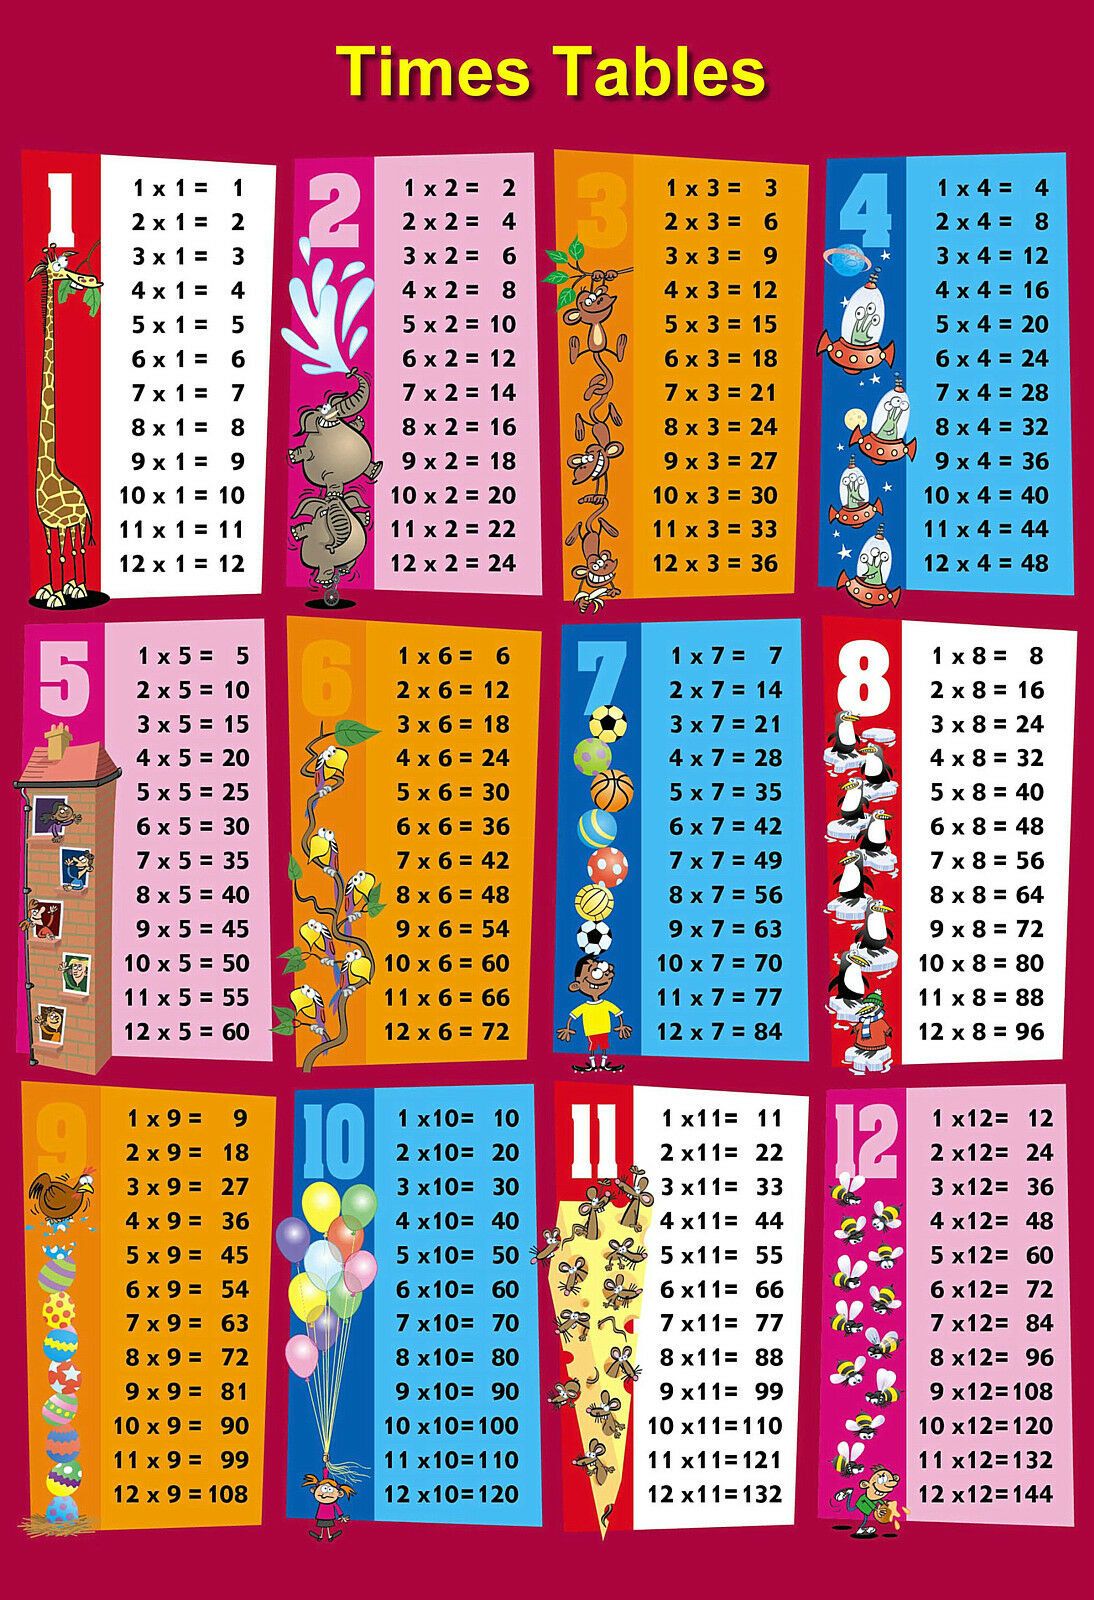 Times Tables Chart Printable A3. Times Tables Worksheets